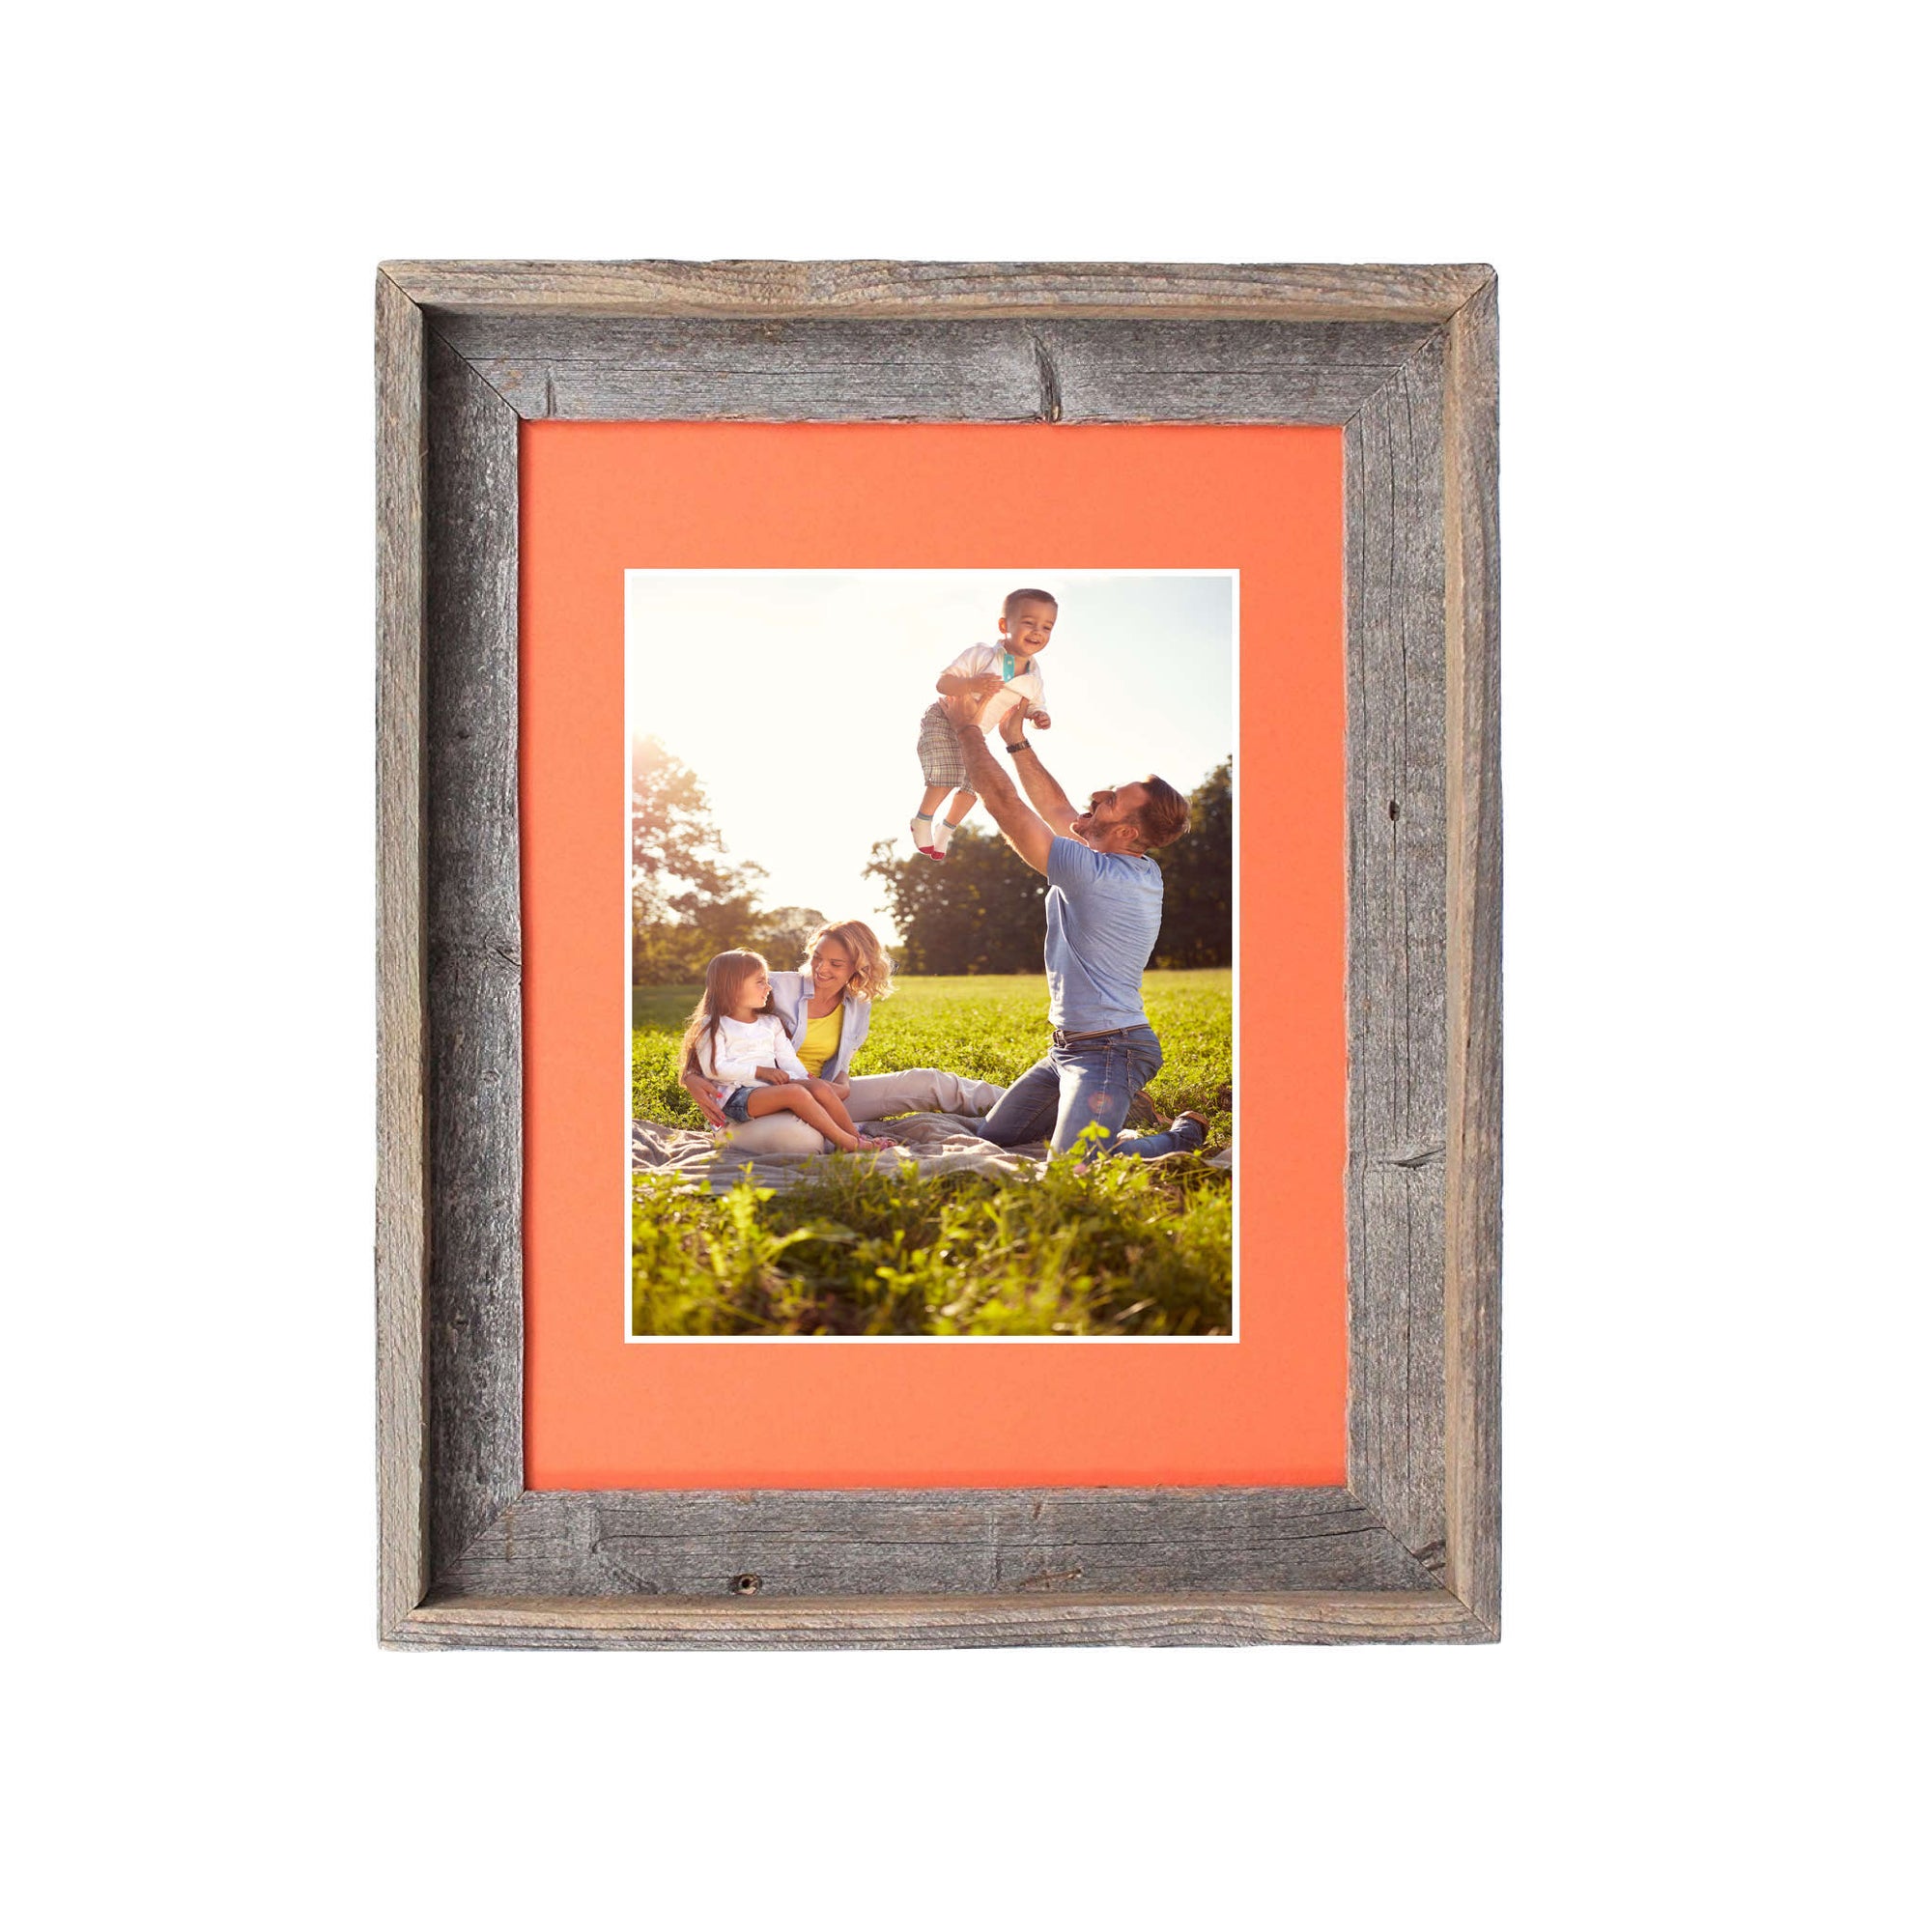 BarnwoodUSA 11 by 14 inch Signature Picture Frame Matted for 8 by 10 inch Photos- 100% Reclaimed Wood, Tangerine Mat